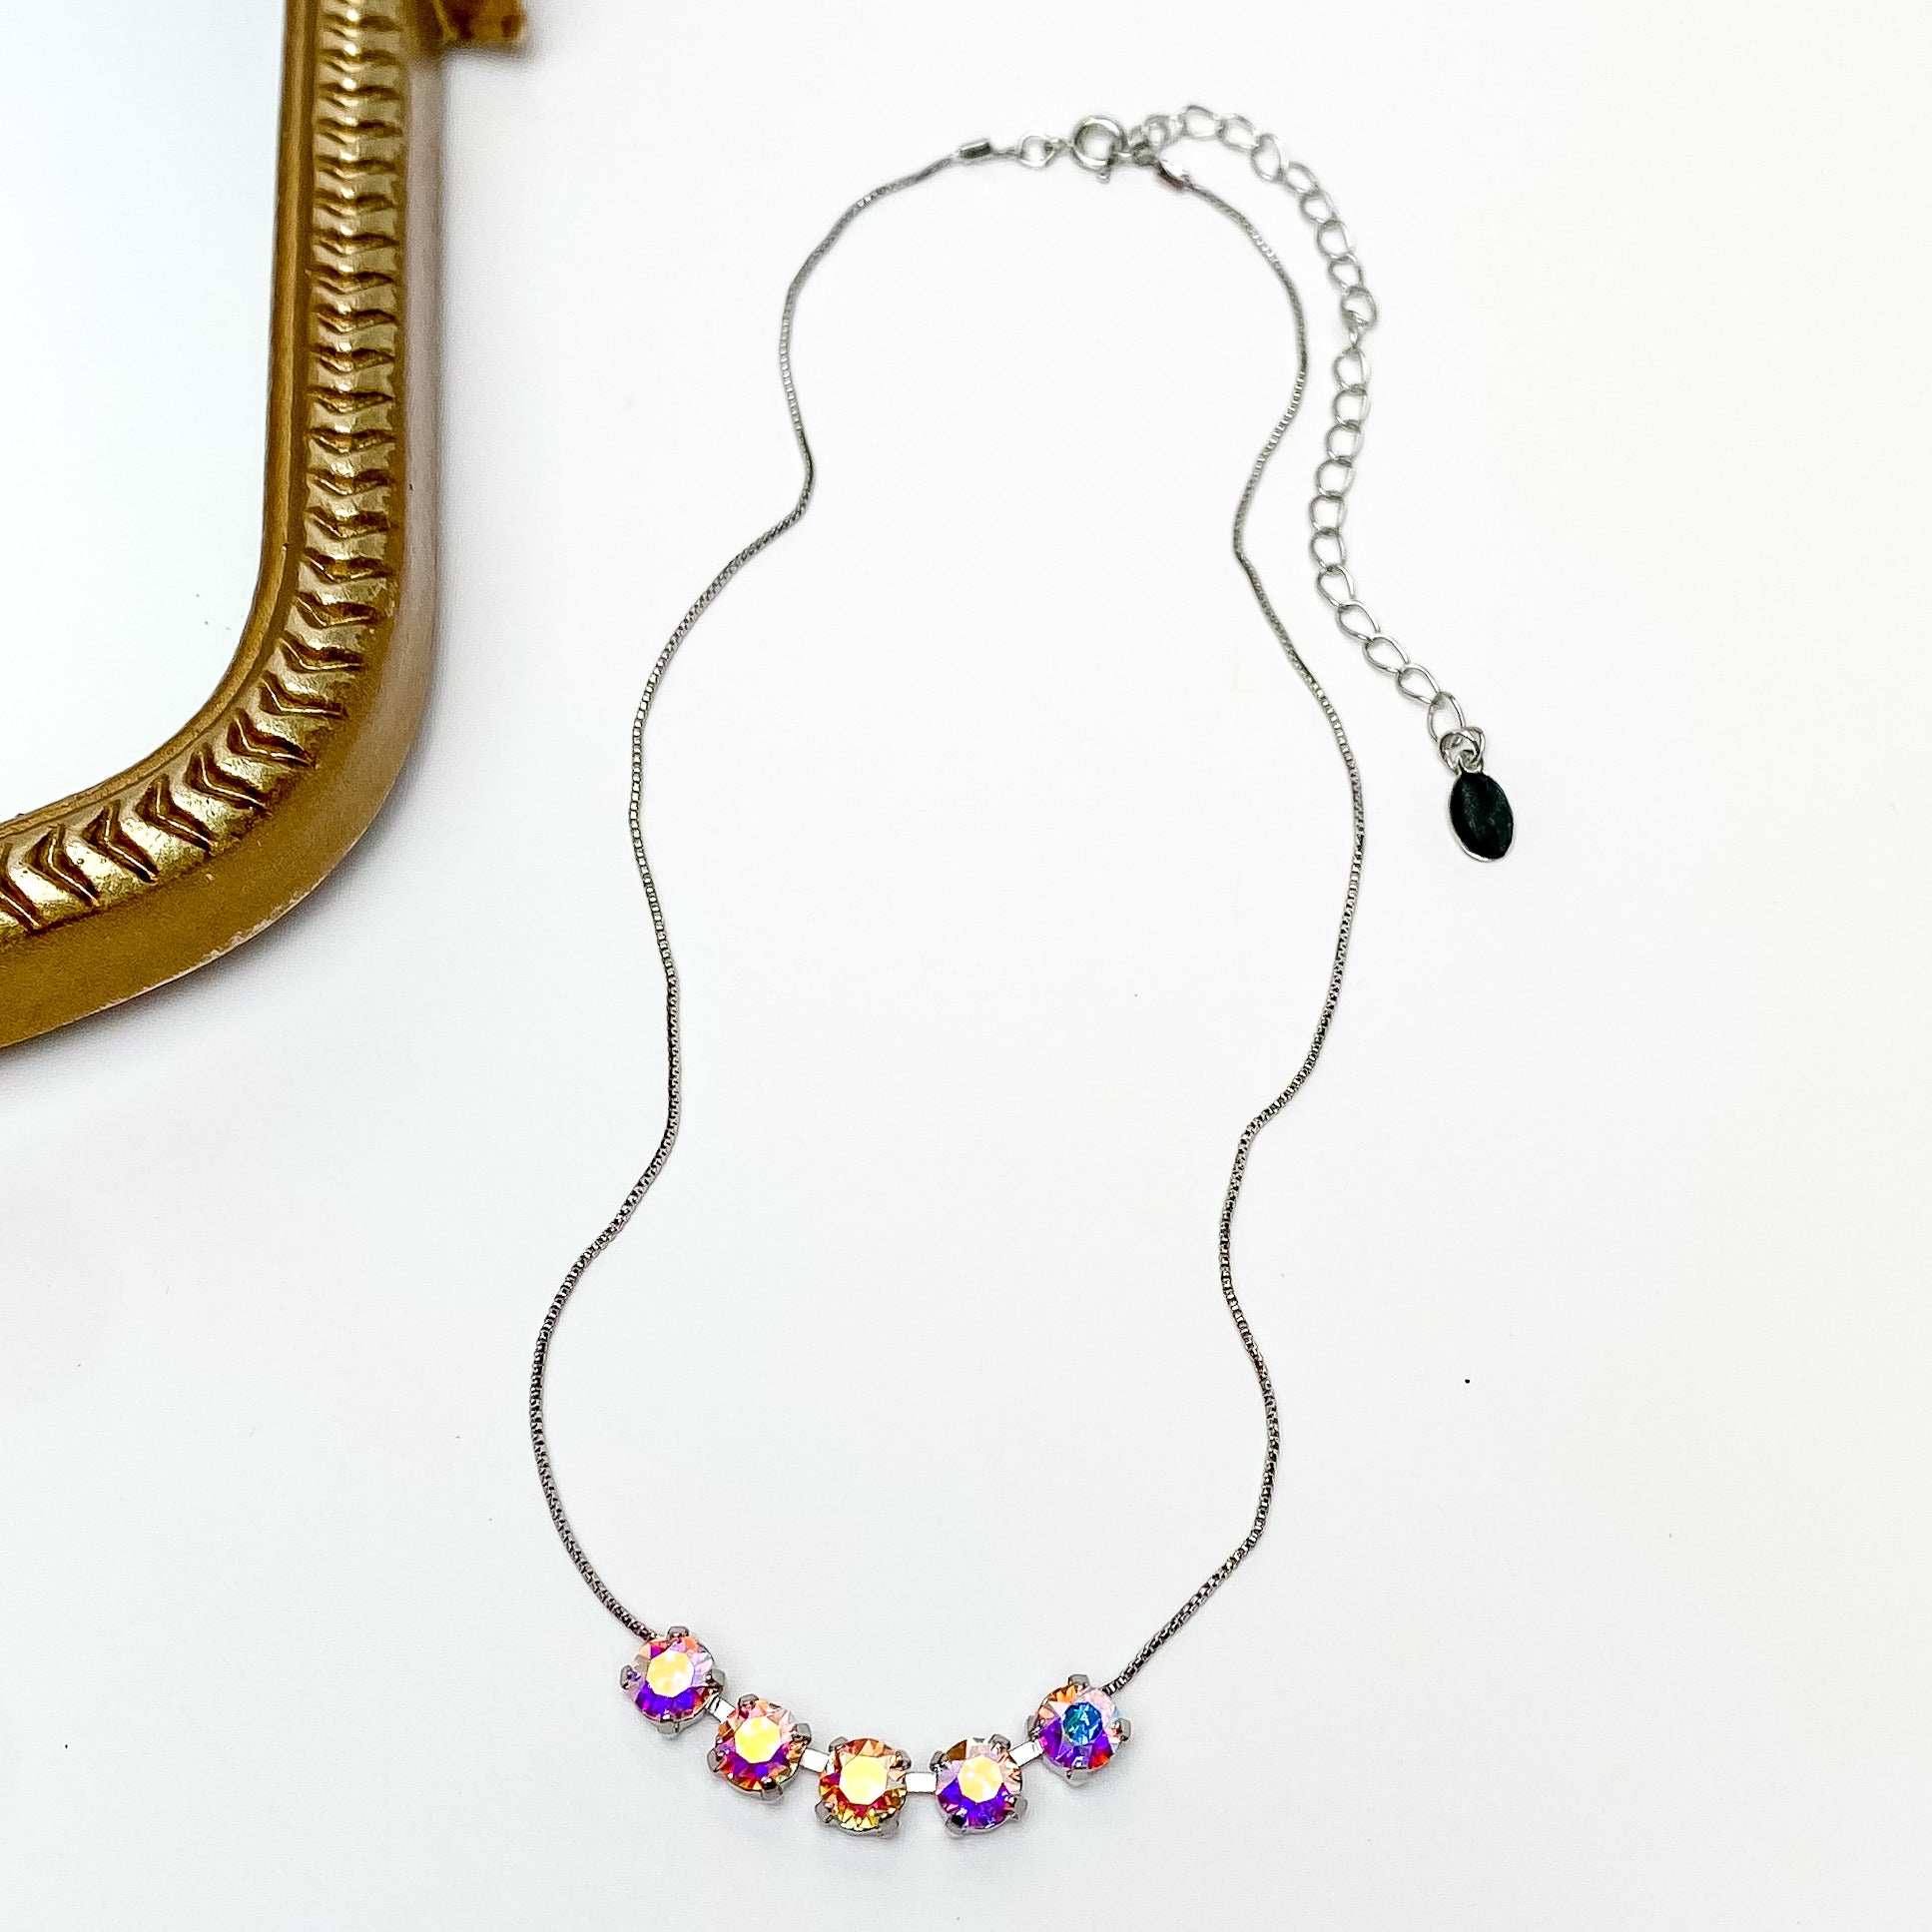 Pictured is a silver necklace with a five ab crystals. This necklace is pictured on a white background with a gold mirror on the left side.